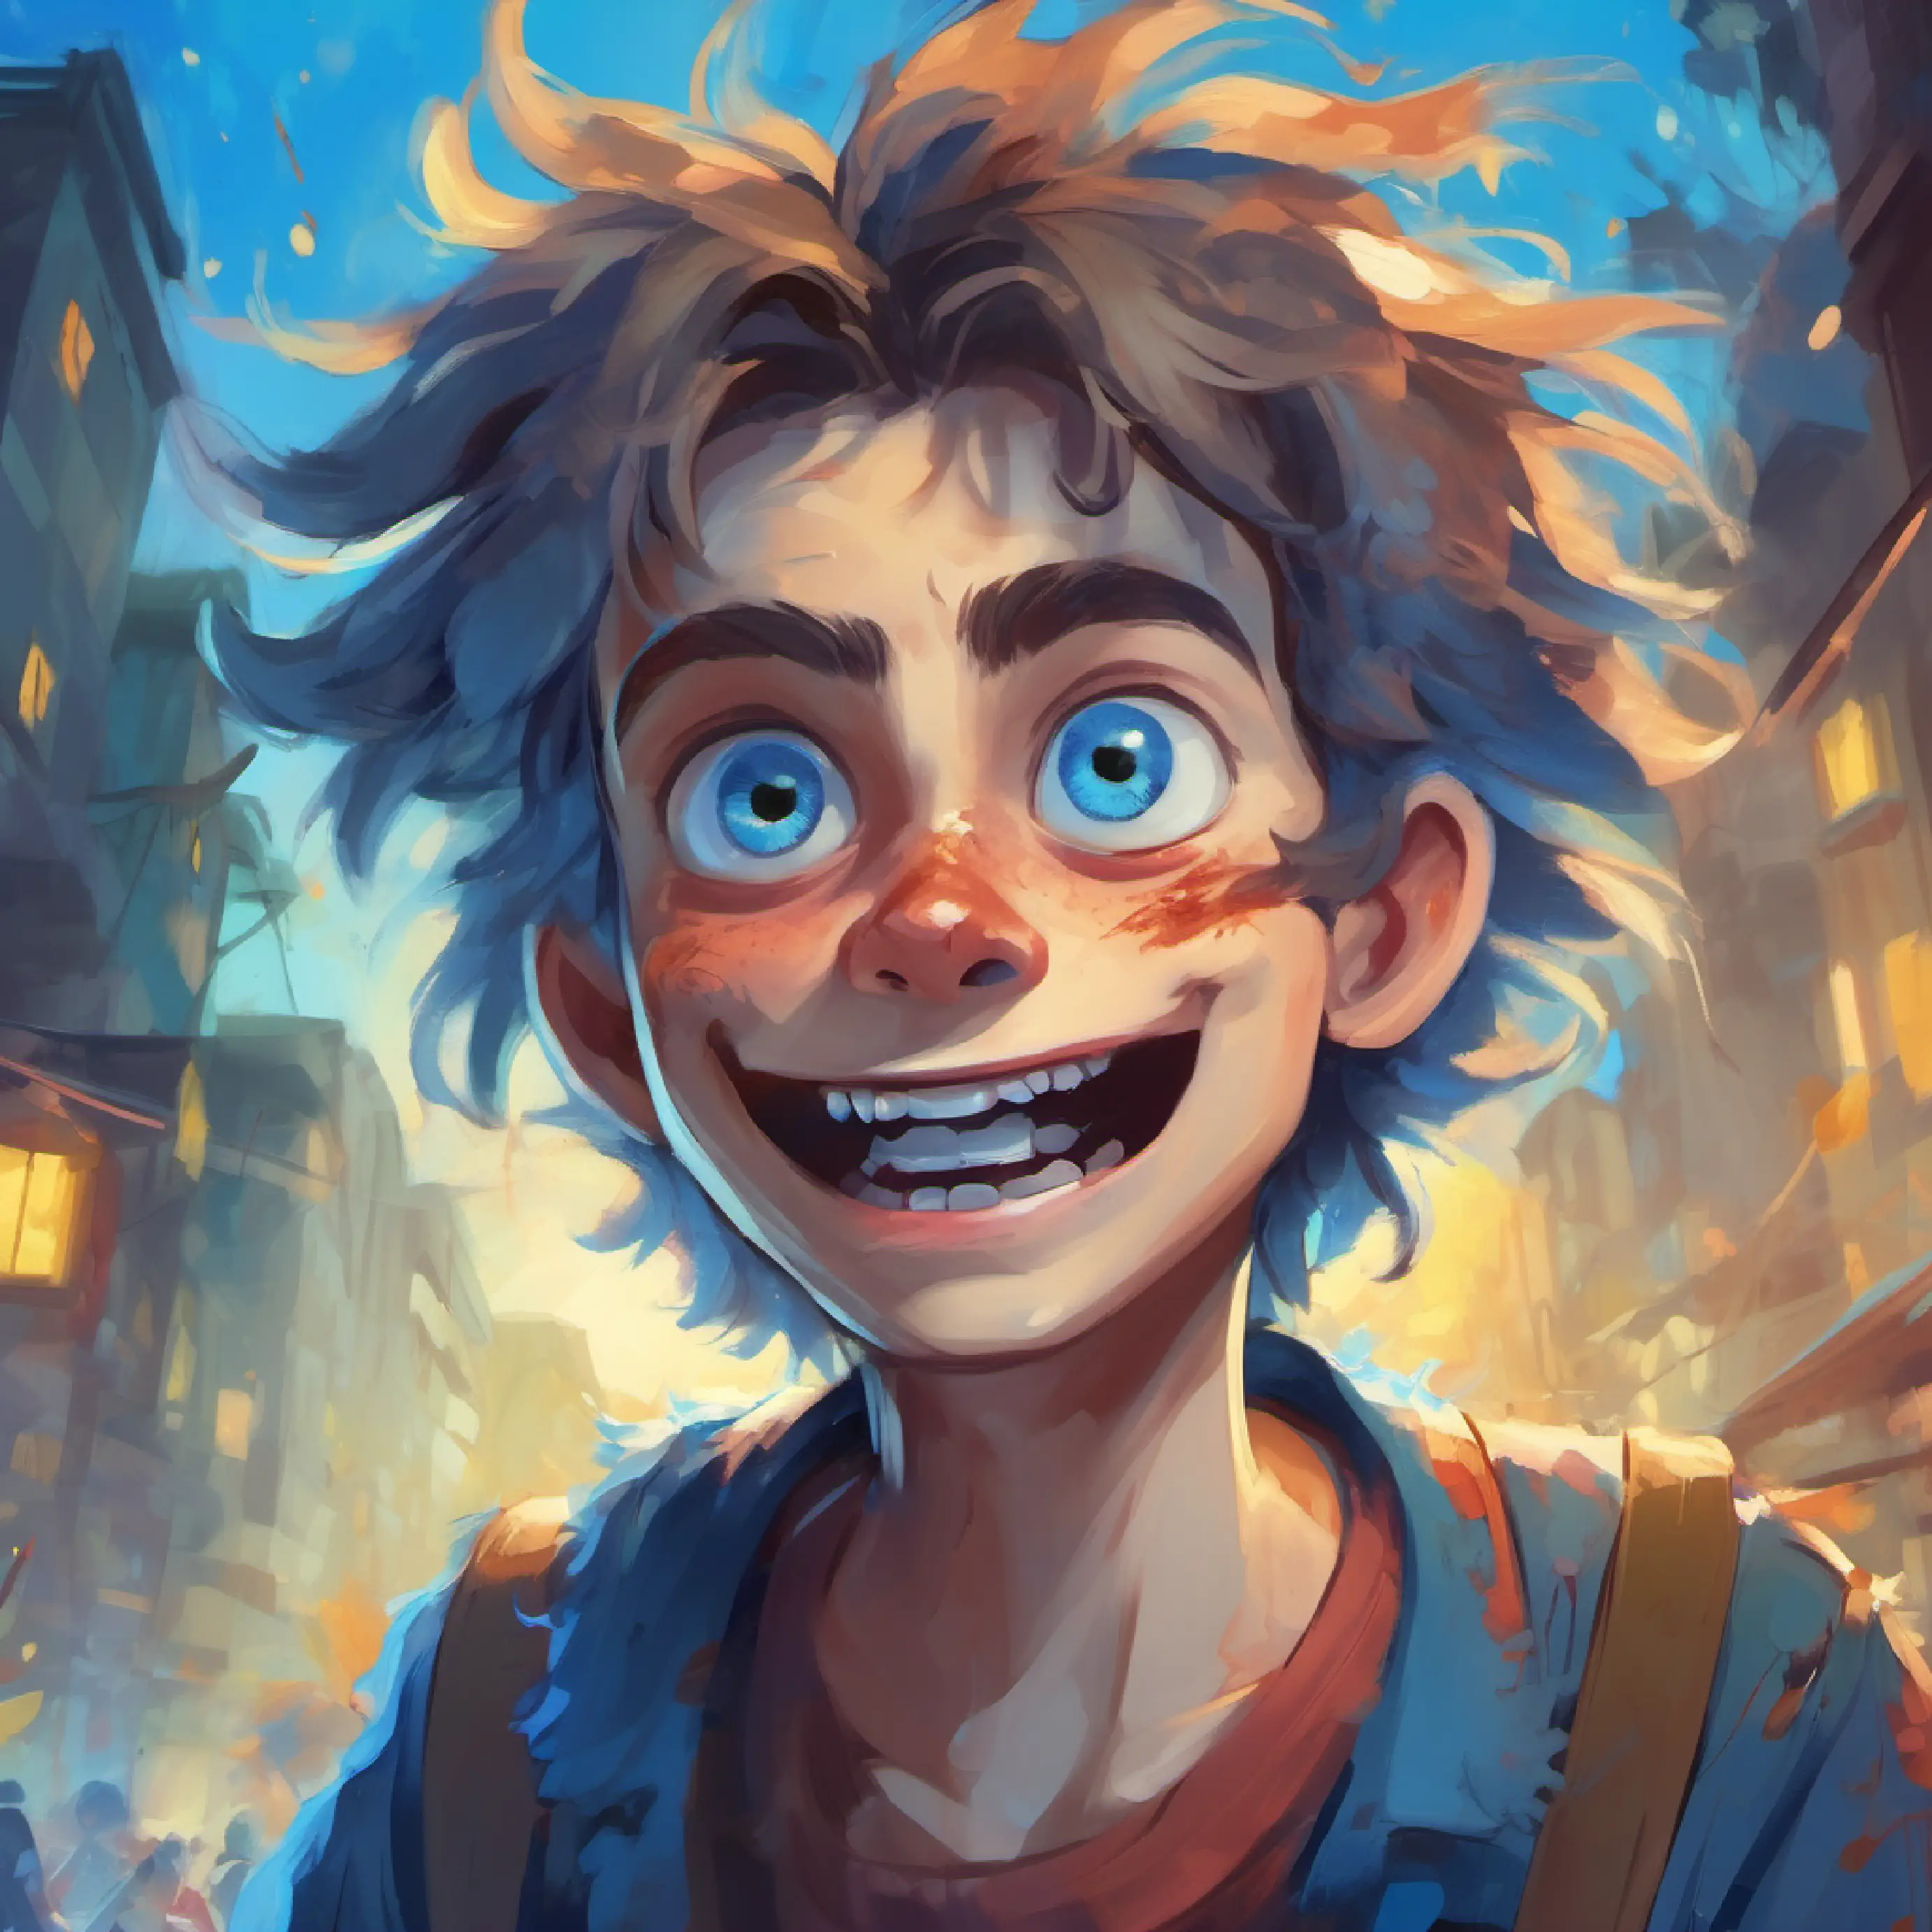 Introduction of Zombie with a friendly smile, sparkling blue eyes, messy hair in a dramatic encounter.